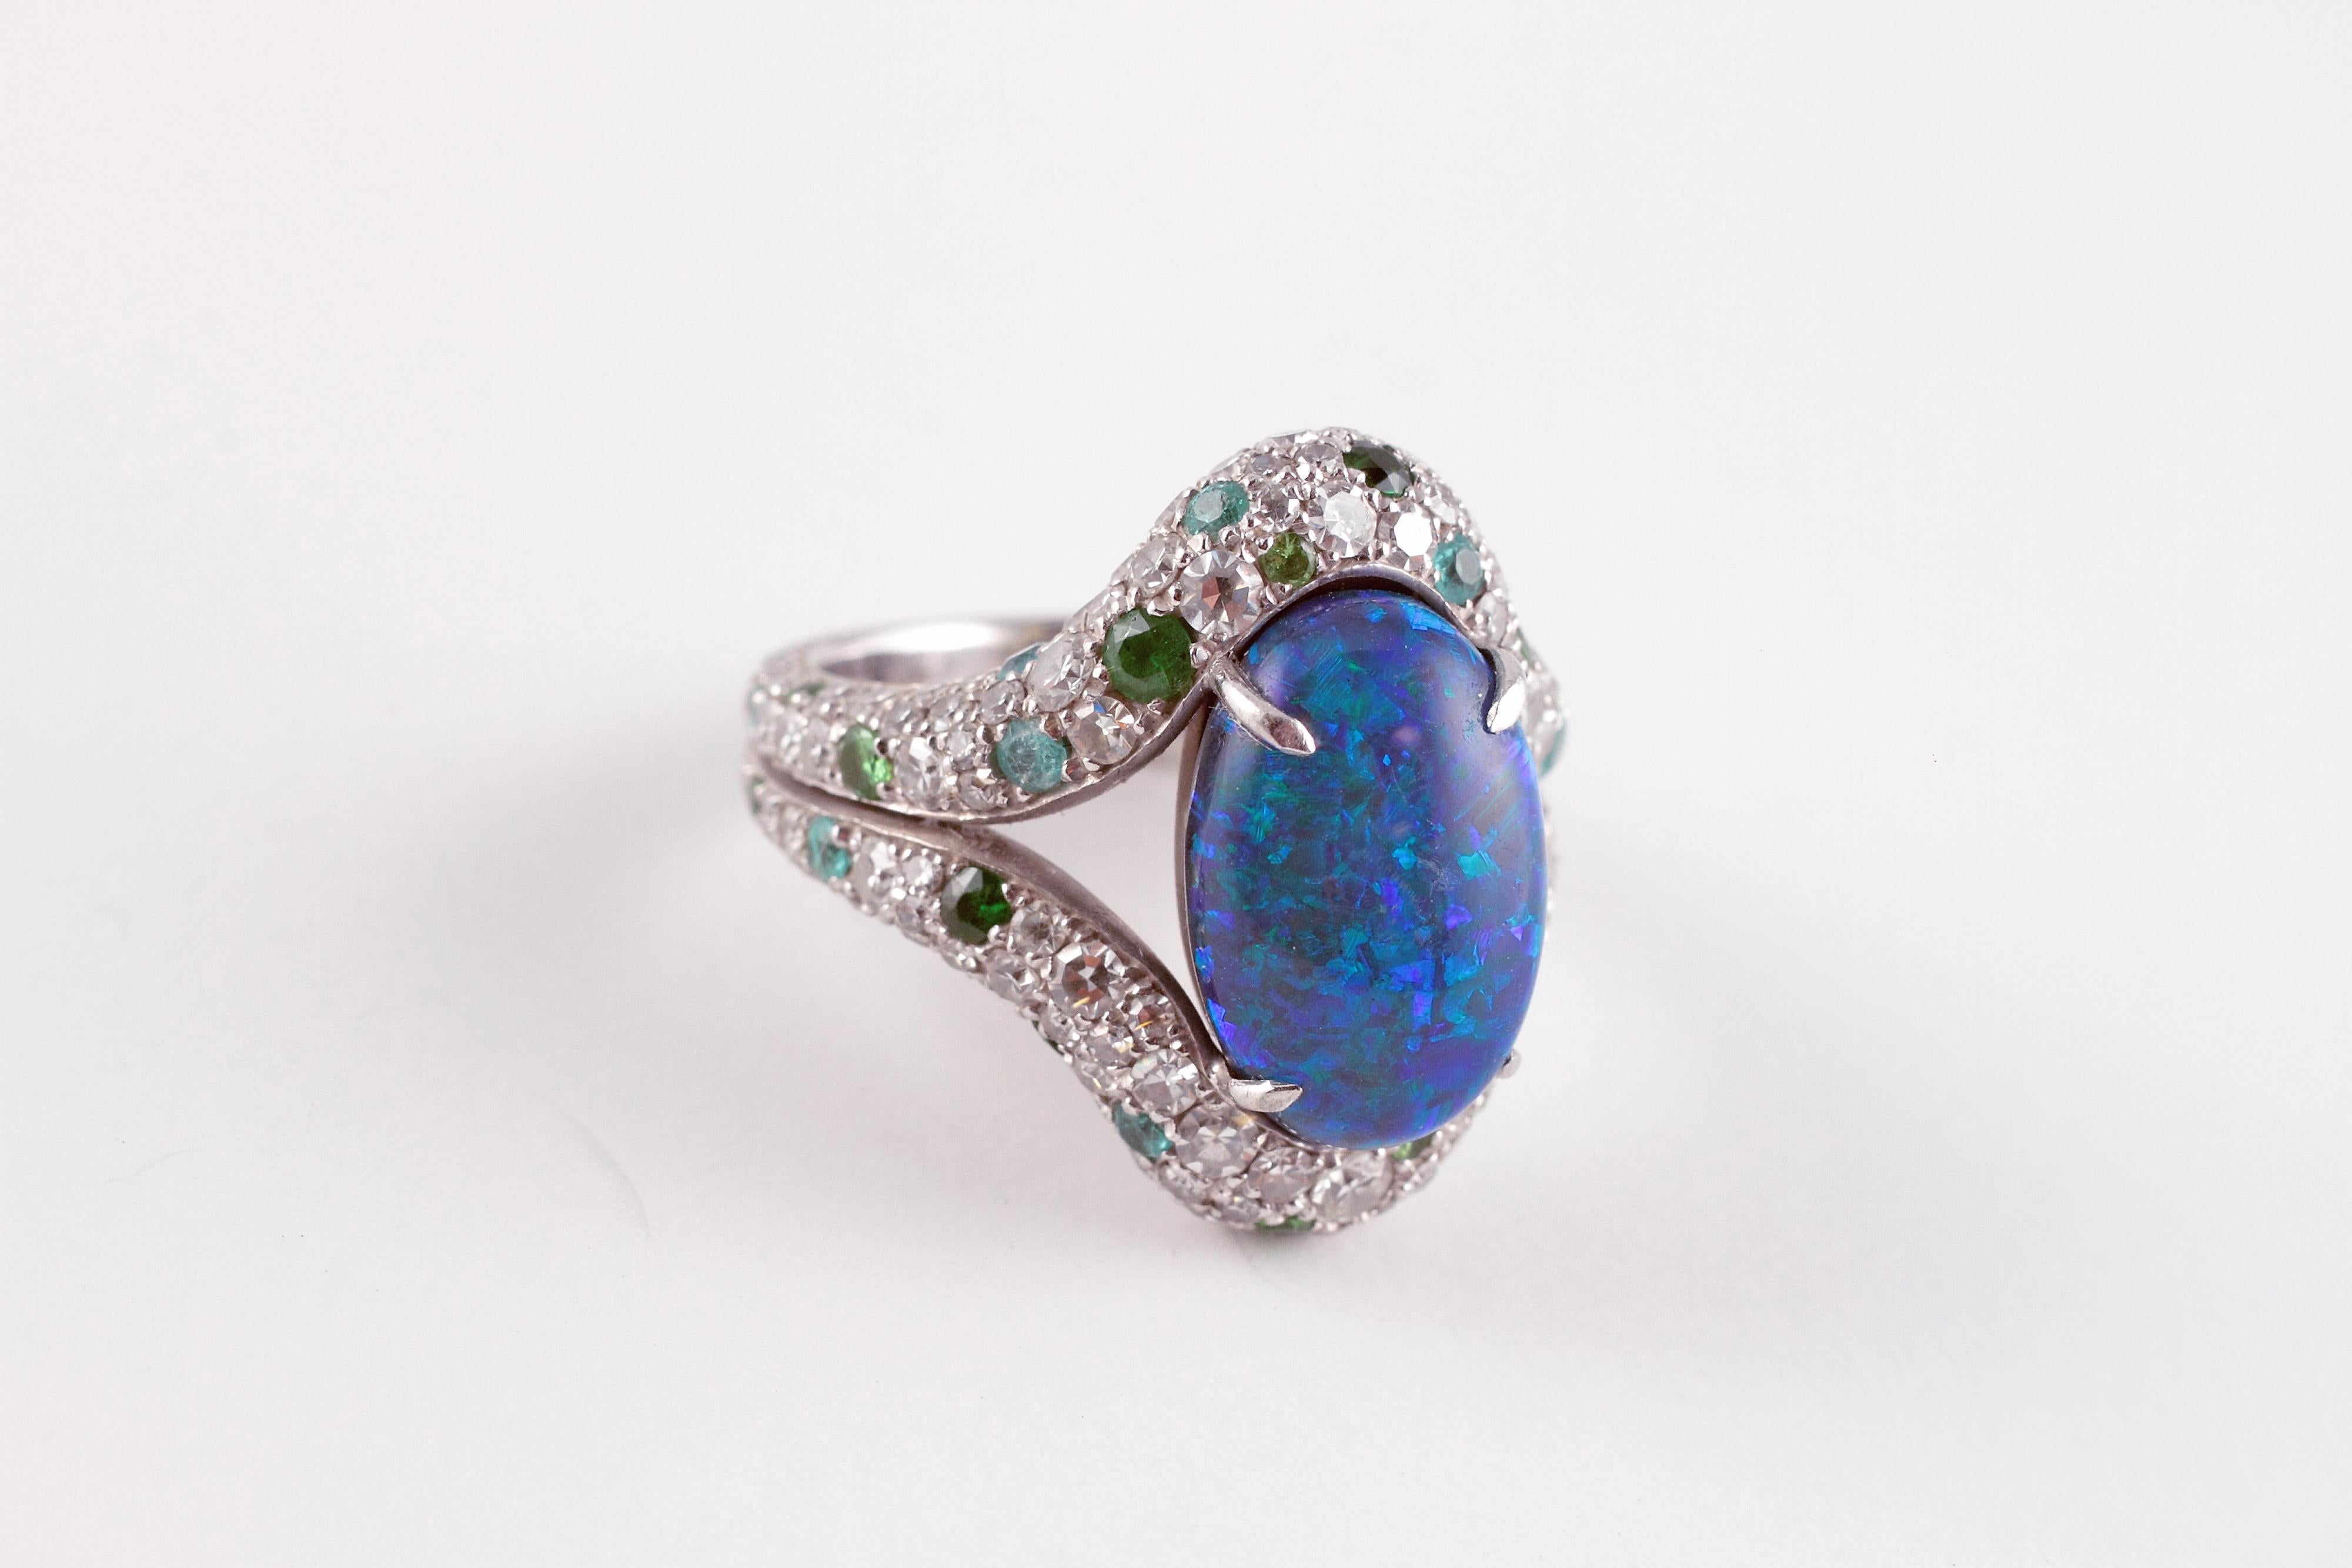 This beautifully hand-crafted platinum ring by famed London designer David Morris is centered with a stunning 4.82 carat oval-shaped, Australian opal, which is surrounded by 0.39 carats of tsavorite gem stones and 0.33 carats of blue tourmalines. 